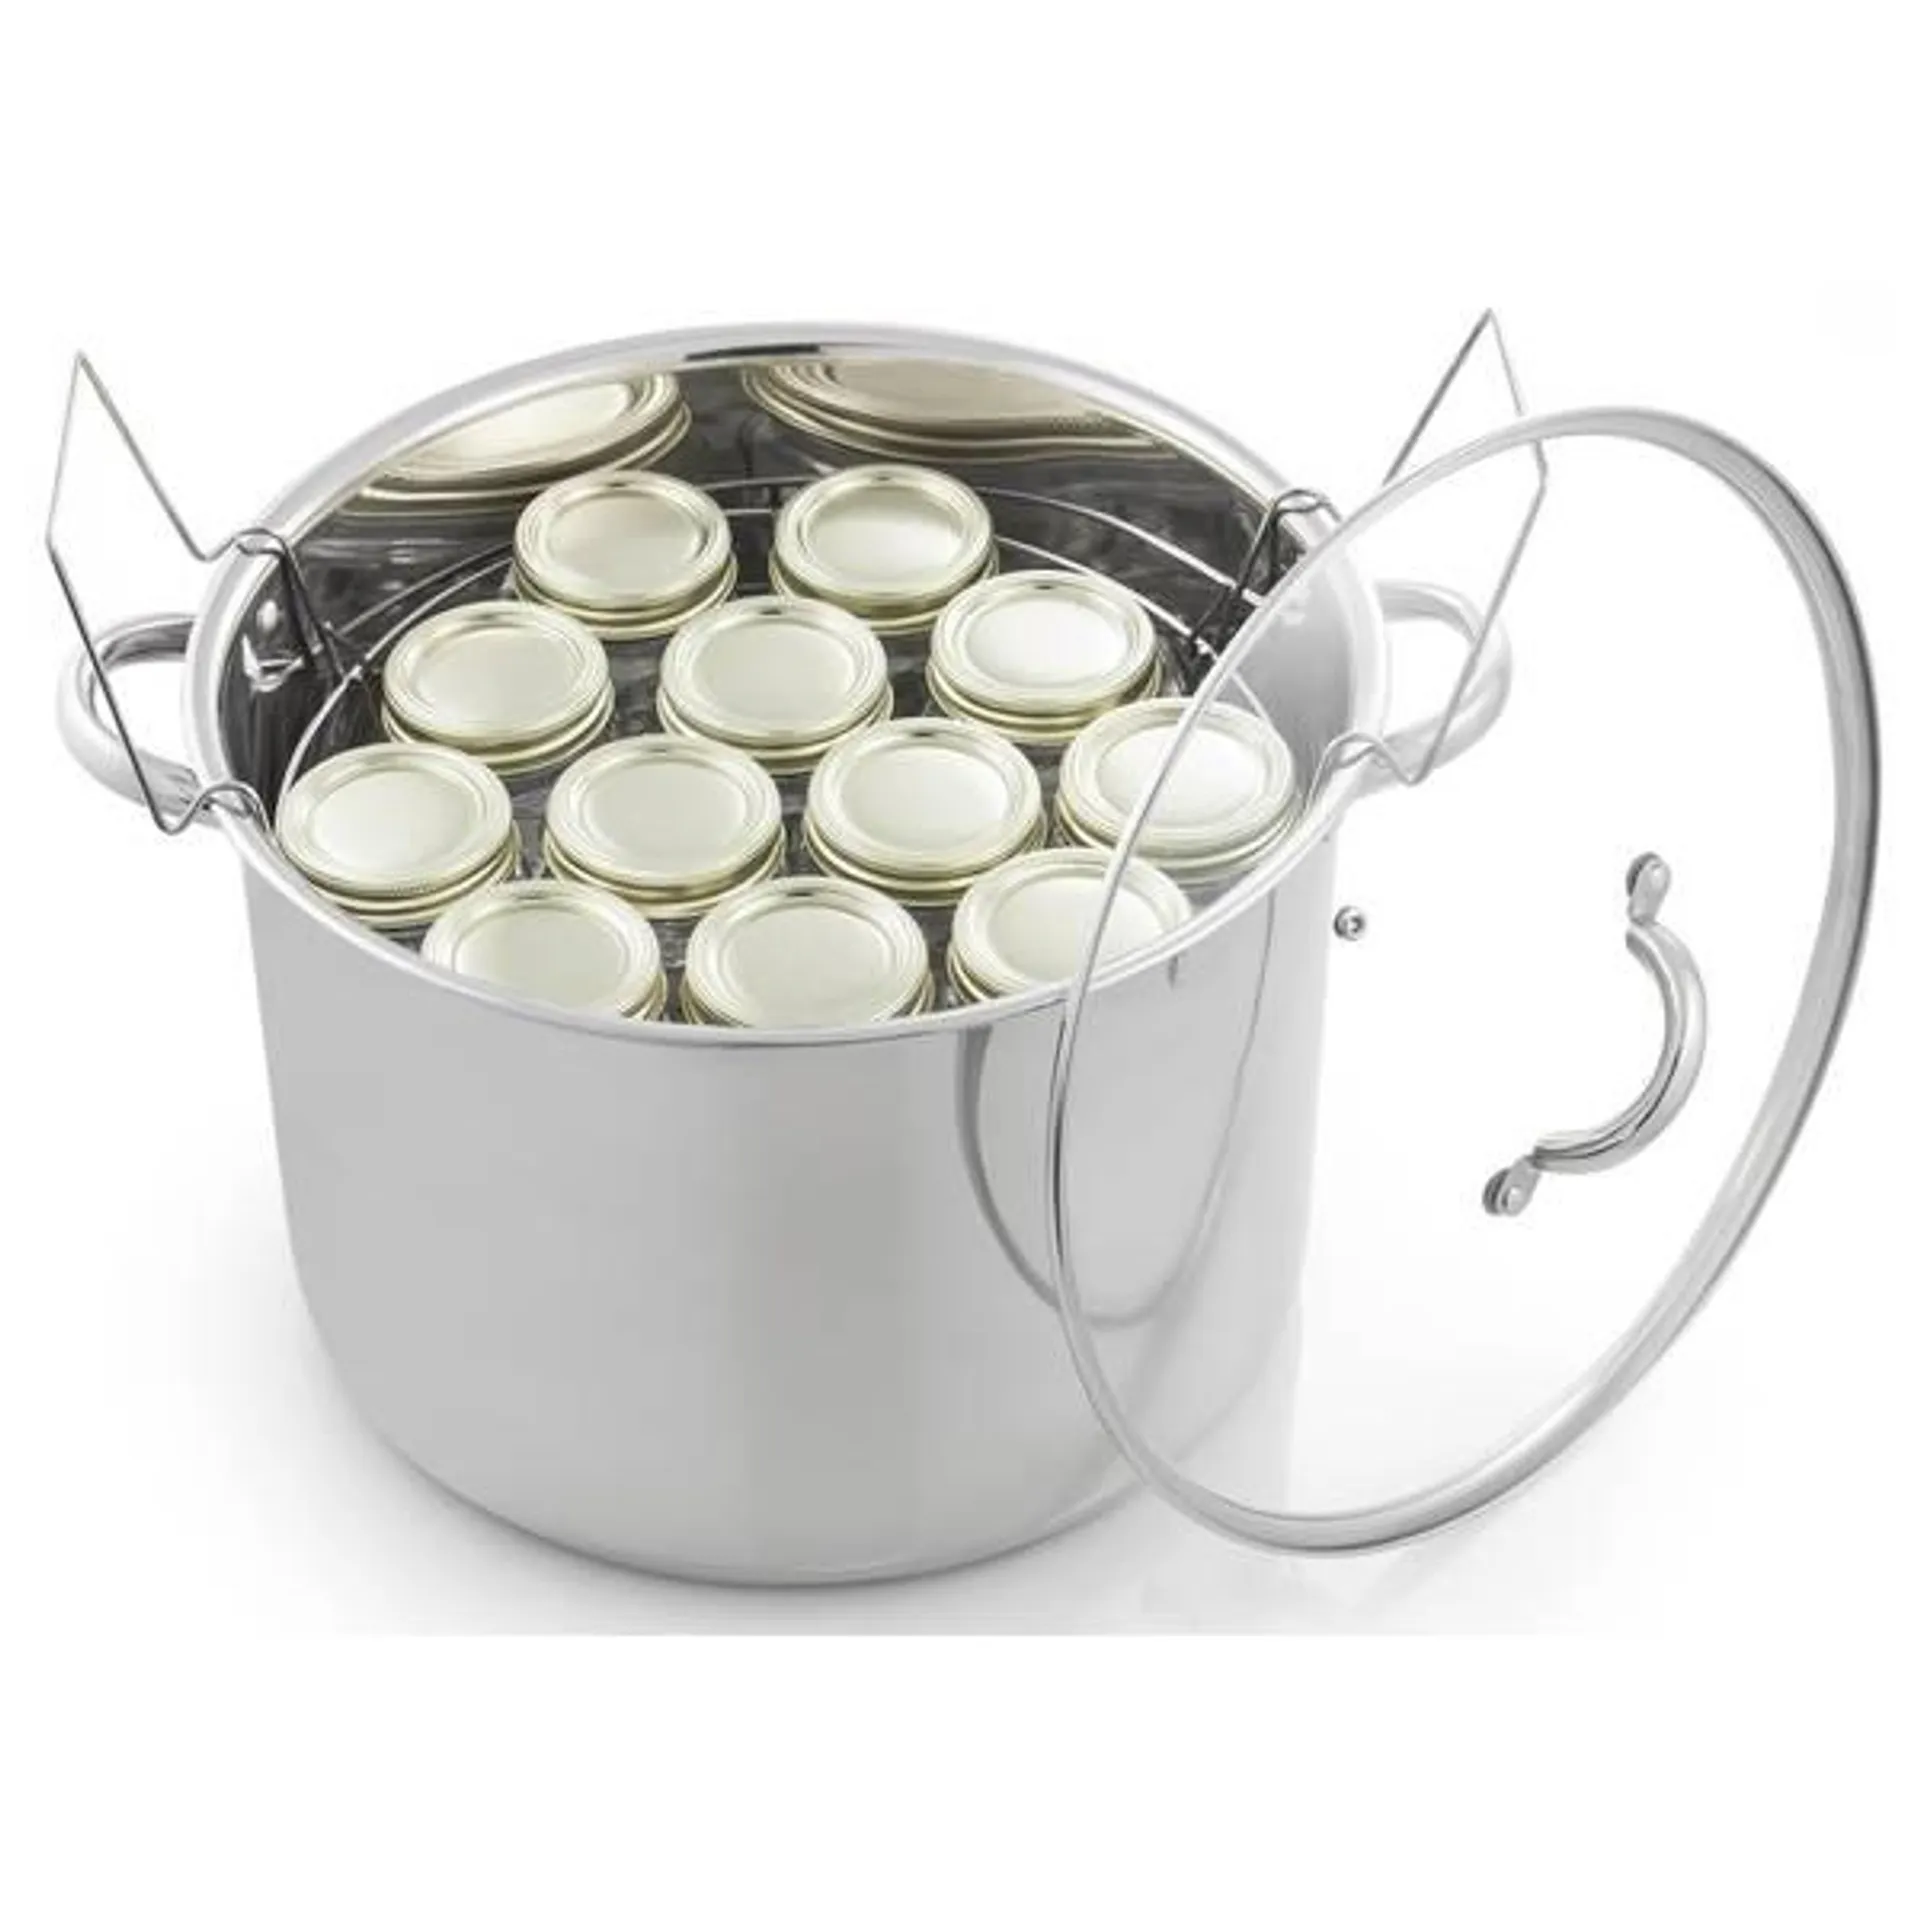 21.5 Qt. Stainless Steel Water Bath Canner